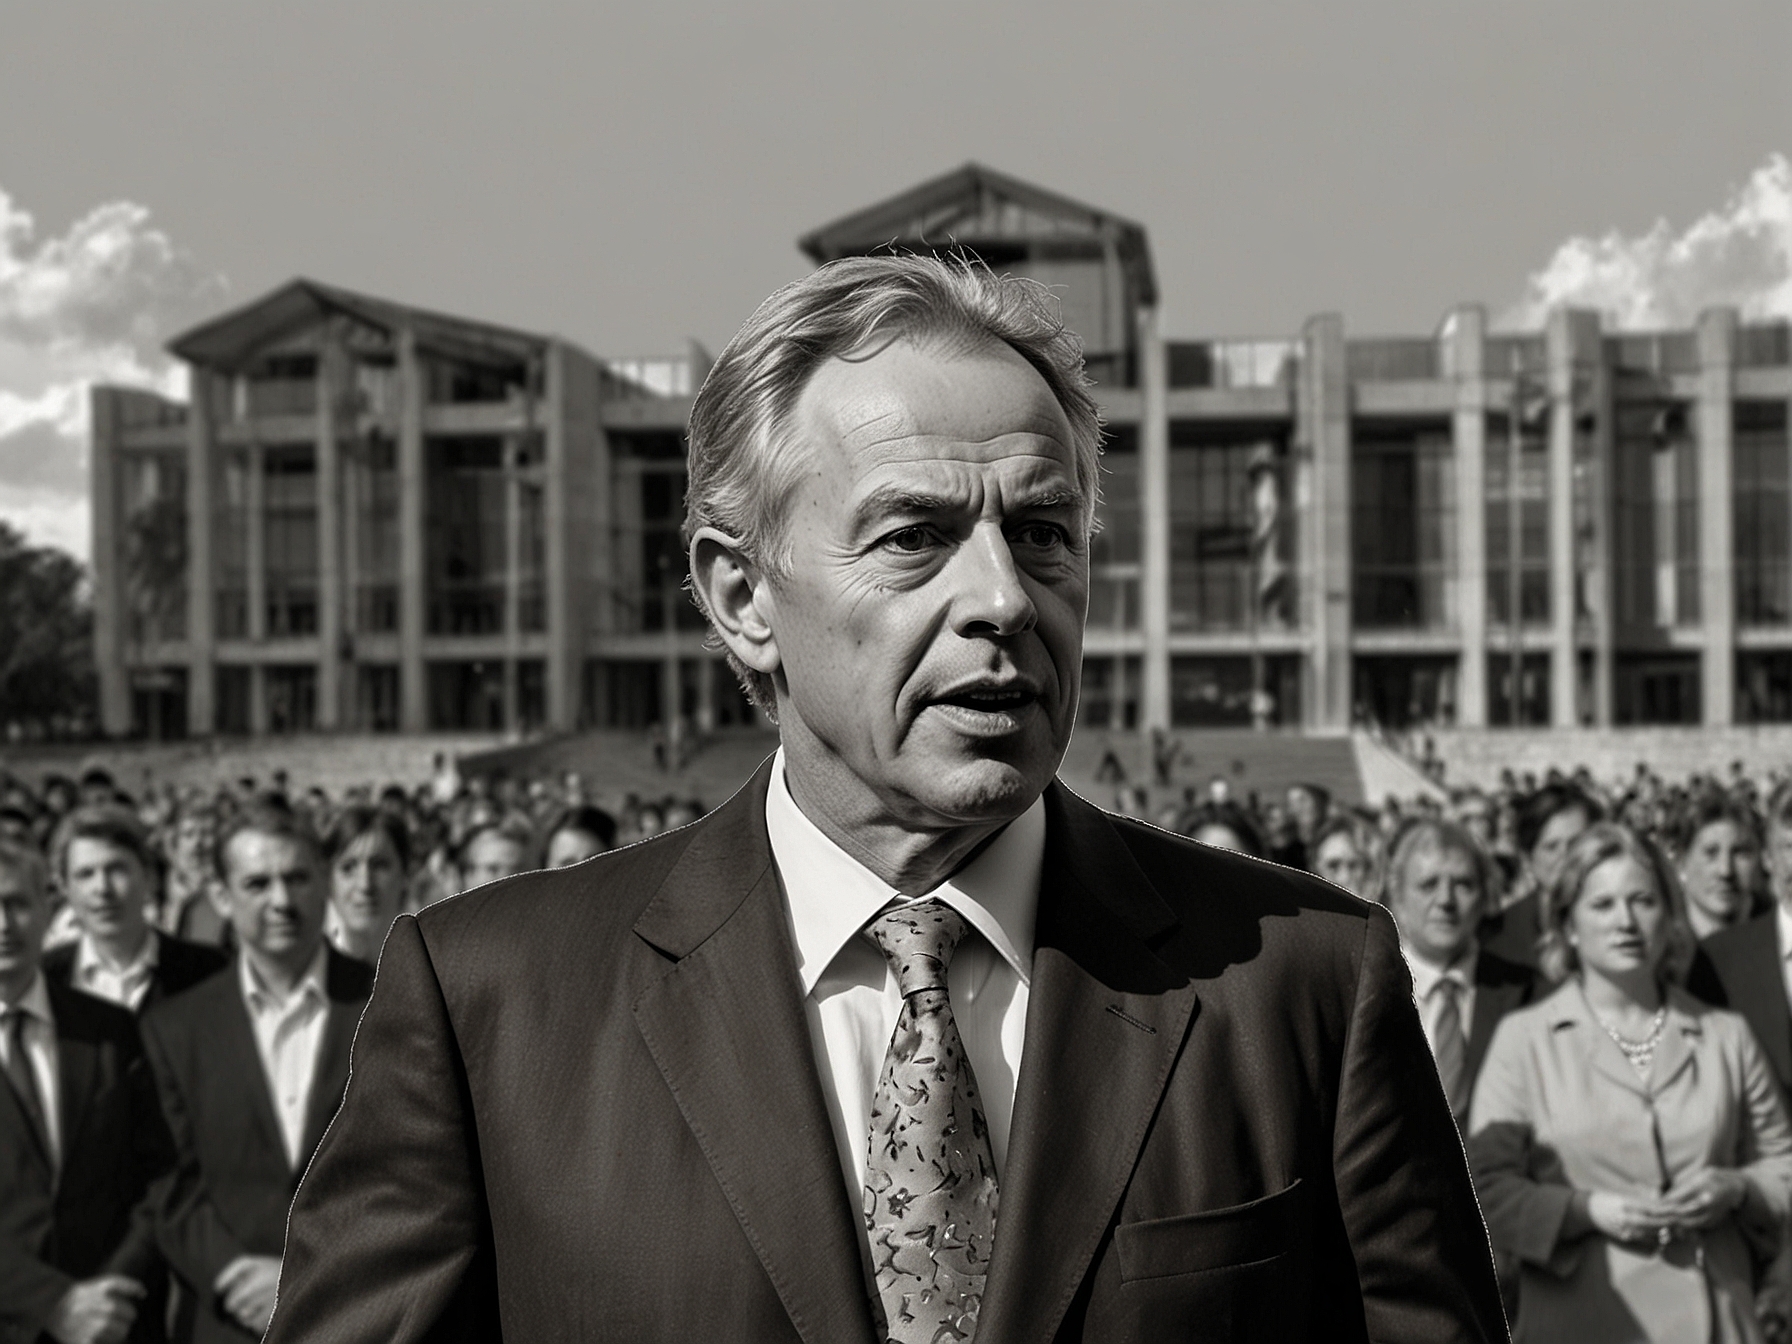 An image showing Sir Tony Blair speaking at an event, emphasizing the success of devolution, with the Scottish Parliament building in the background to signify regional governance.